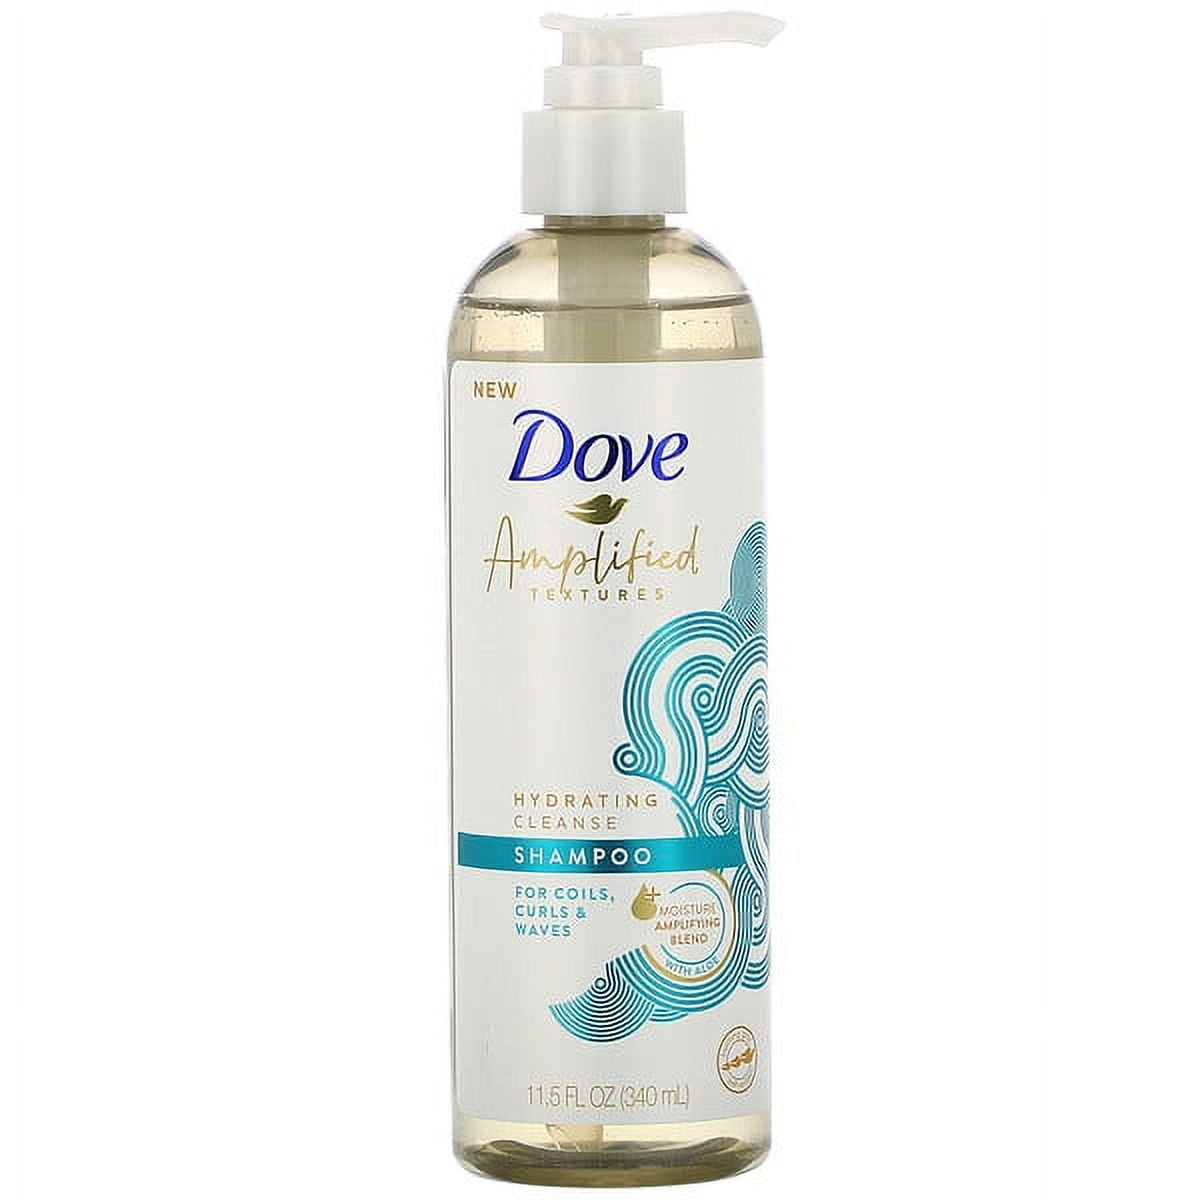 Dove Finishing Hair Gel, Amplified Textures, Frizz Control, with Aloe for  Curly, Wavy Hair, 8 oz 